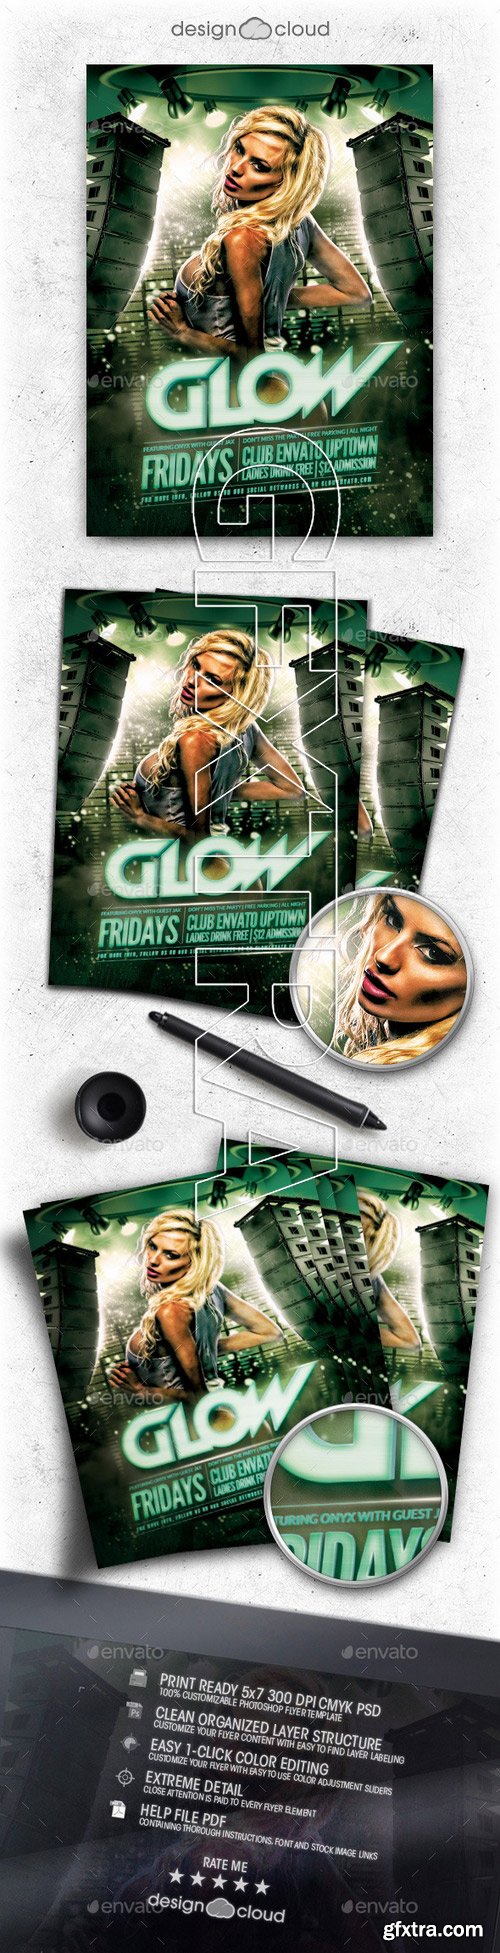 Graphicriver - Glow Club Flyer Template 11300618